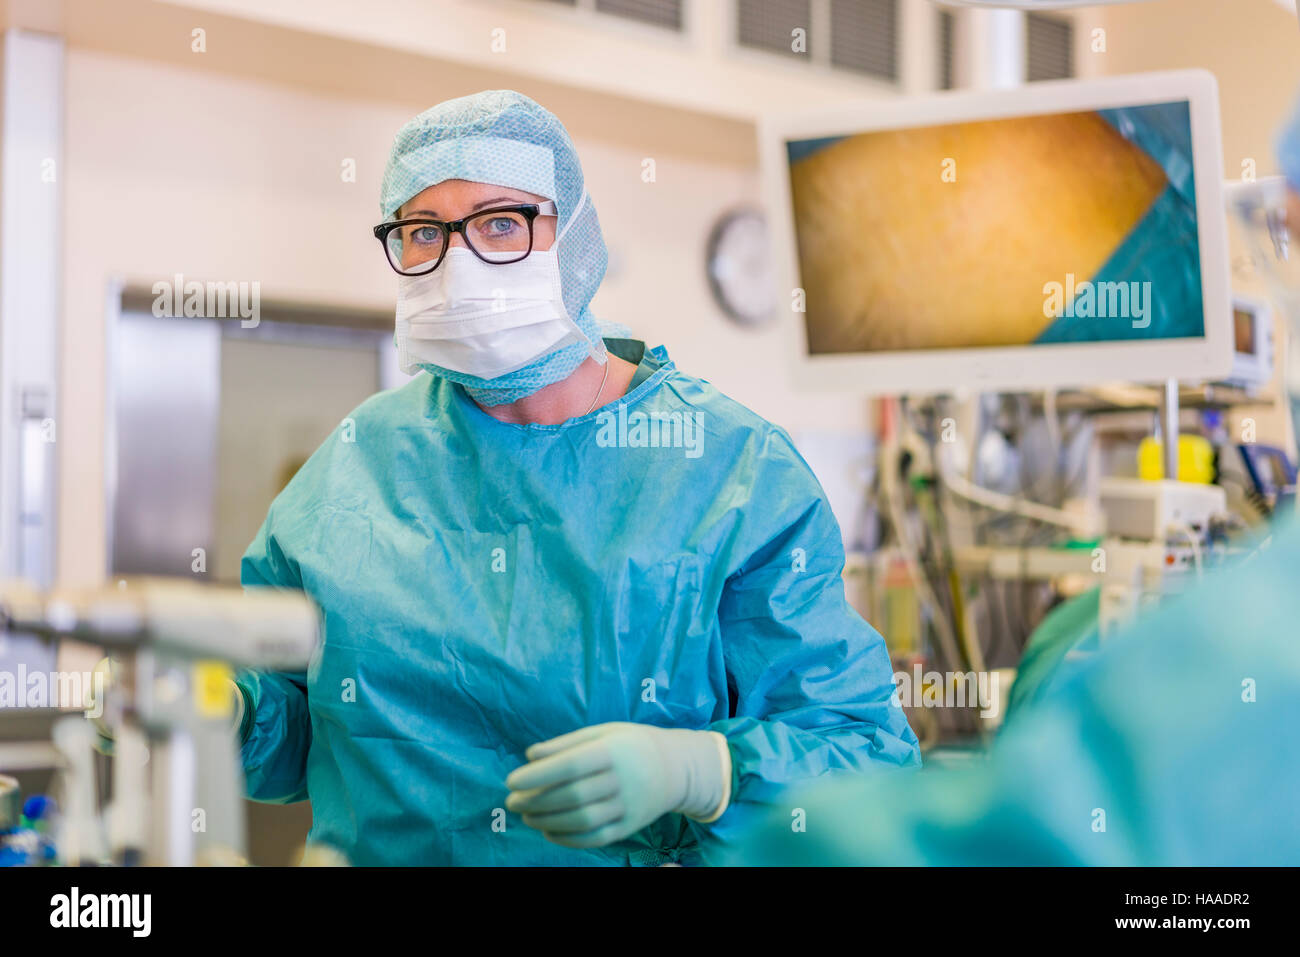 Surgical nurse, Heart valve replacement surgery, operating room, Reykjavik, Iceland Stock Photo